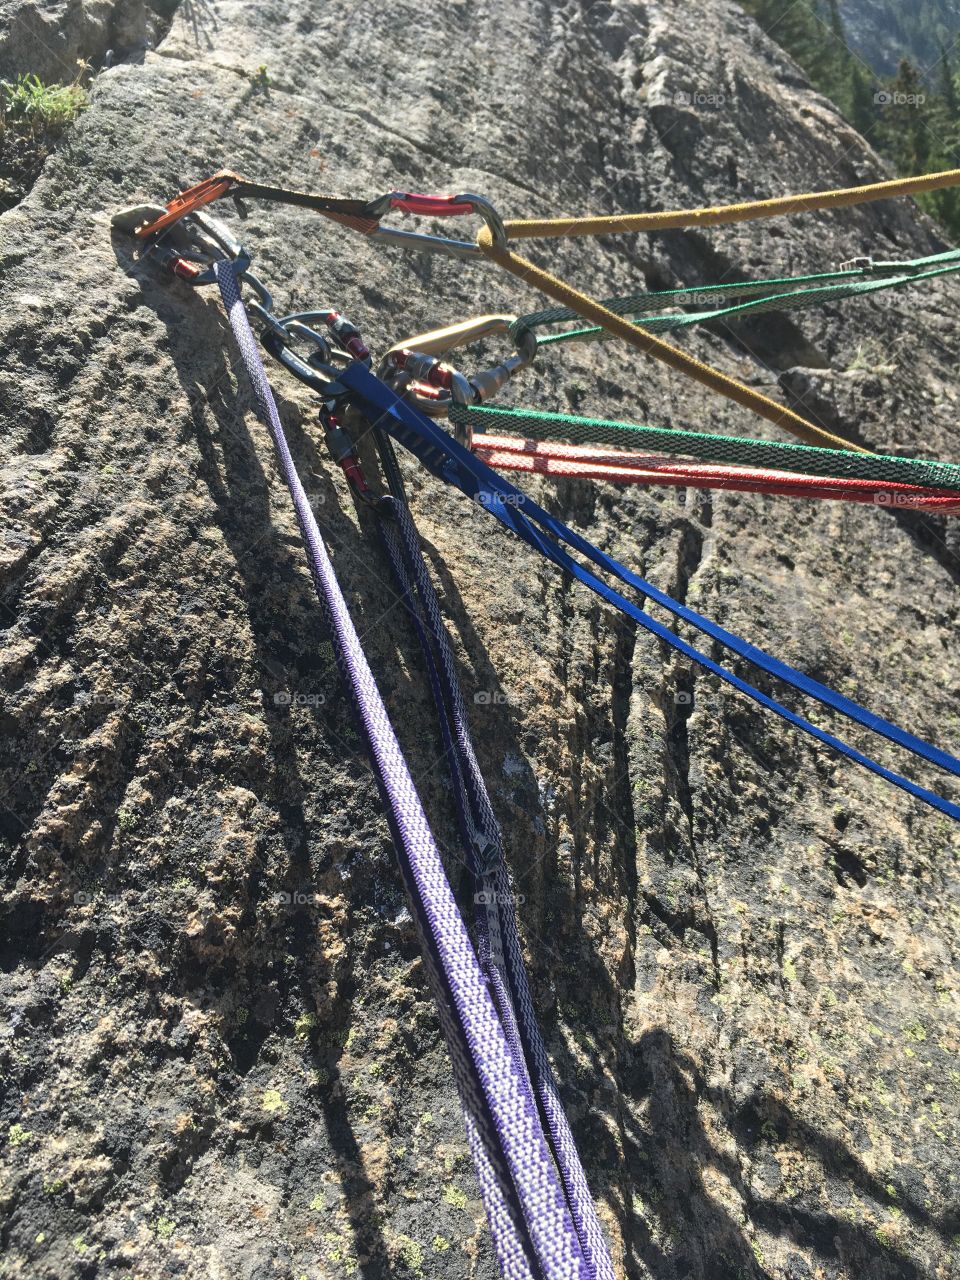 Colored slings of rock climbers attached to a rock by carabiners